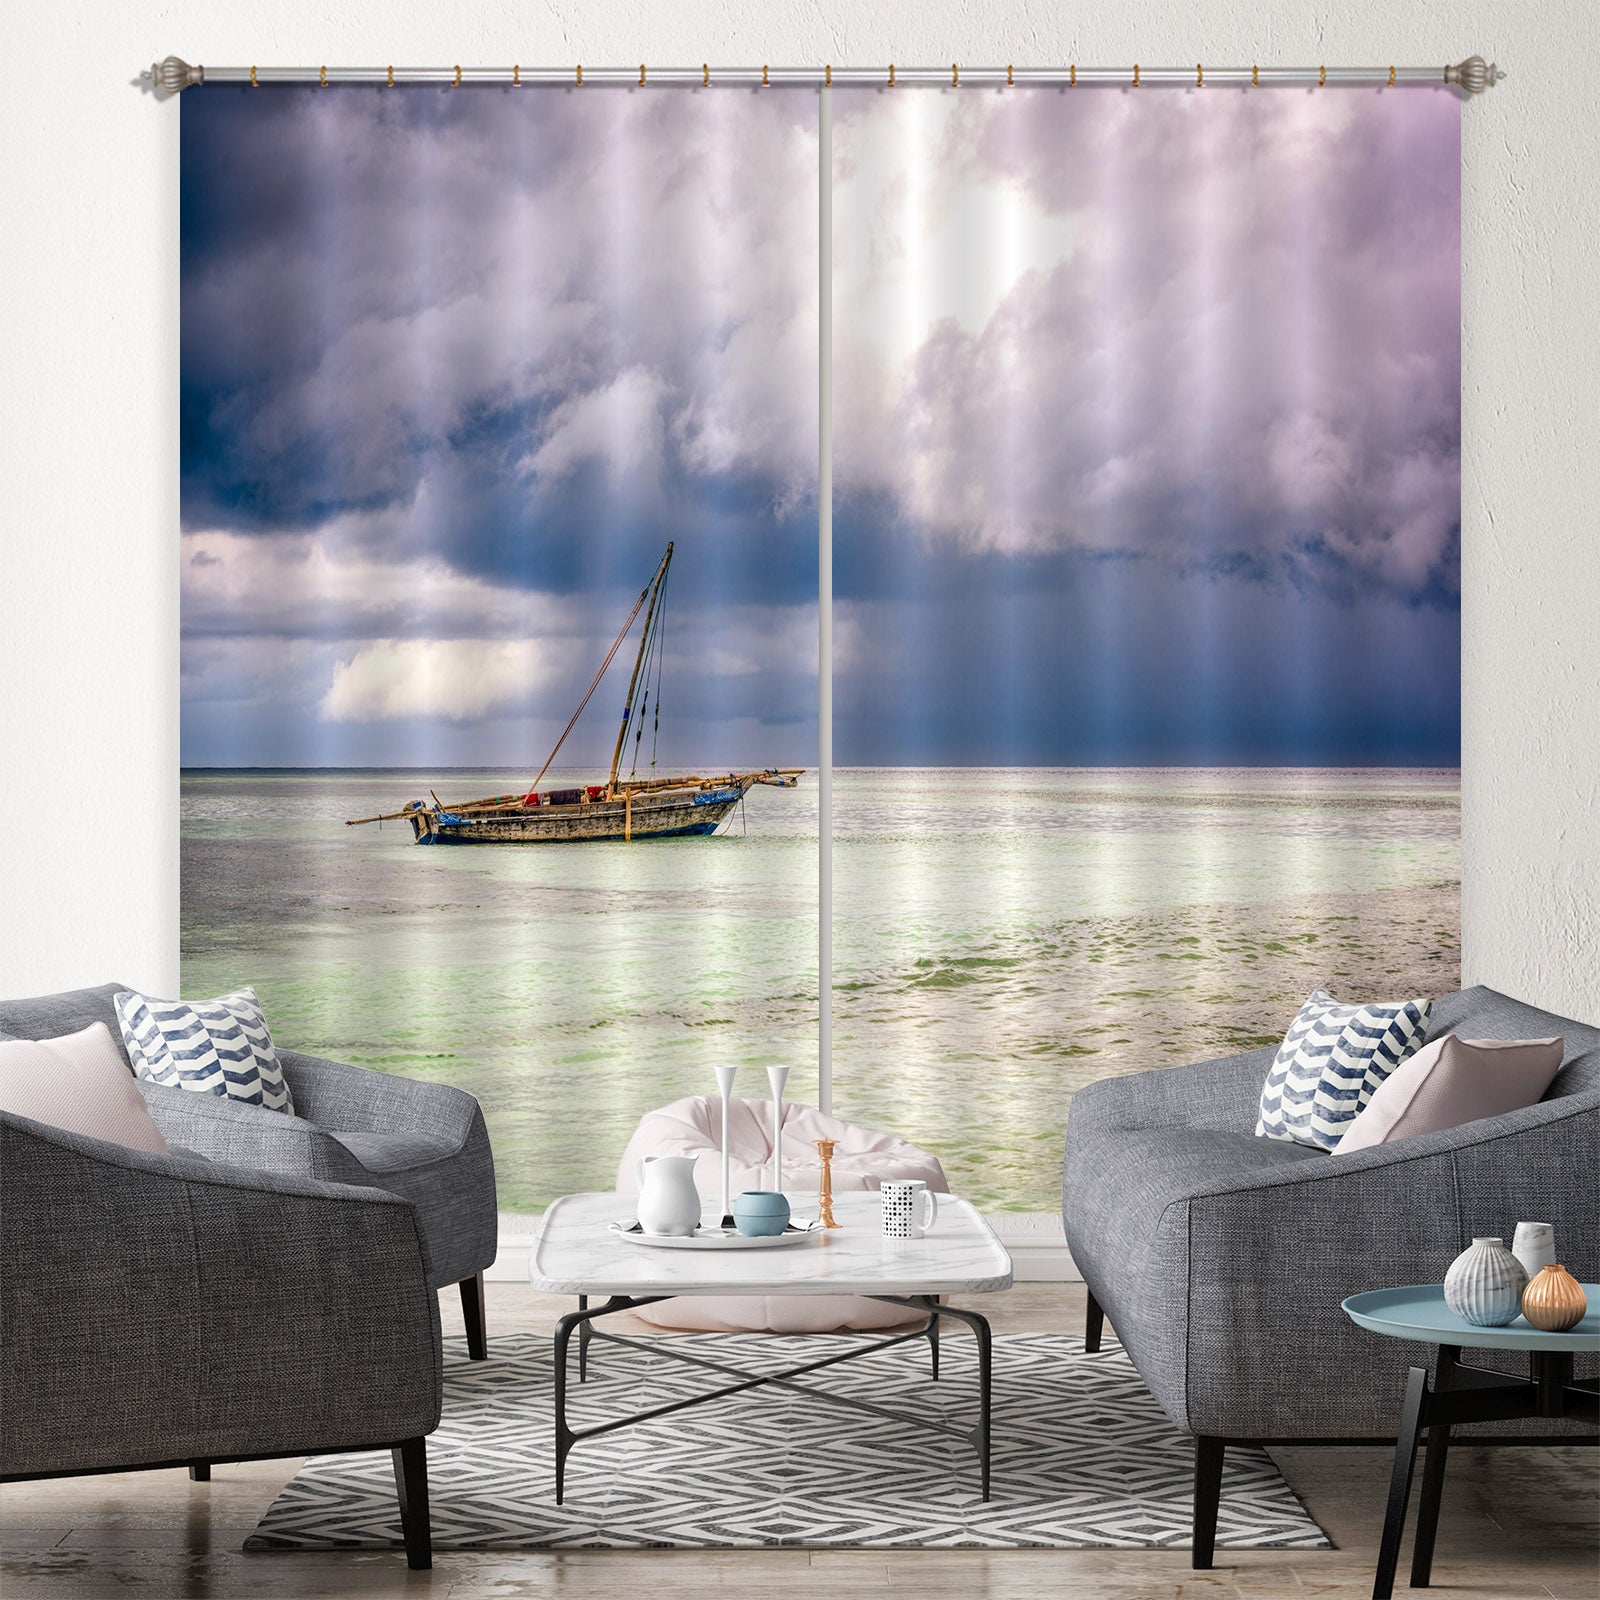 3D Crystal Clear Water 112 Marco Carmassi Curtain Curtains Drapes